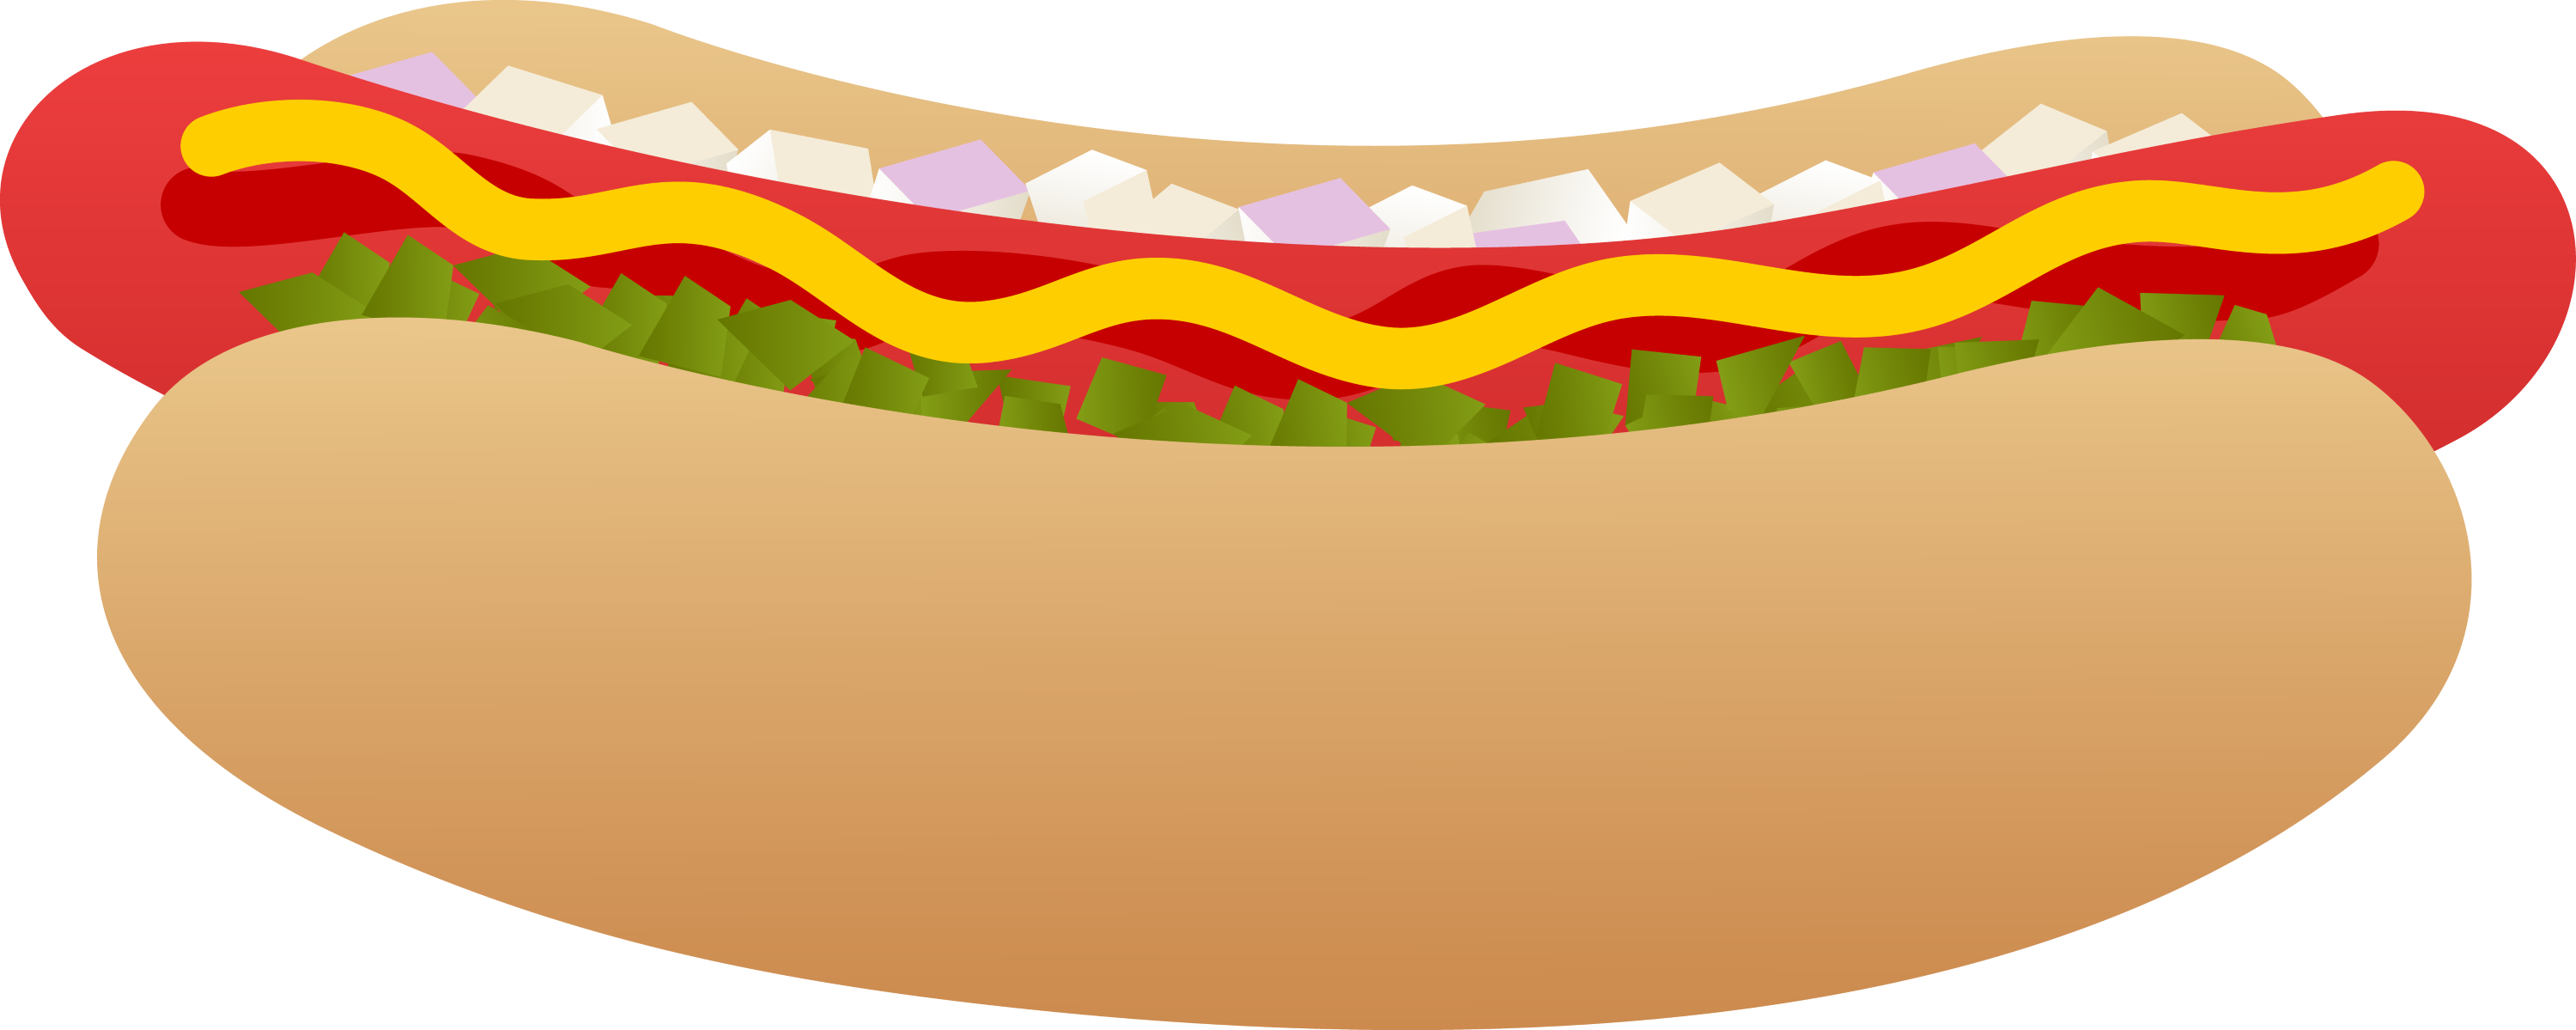 free clipart images of hot dogs - photo #2